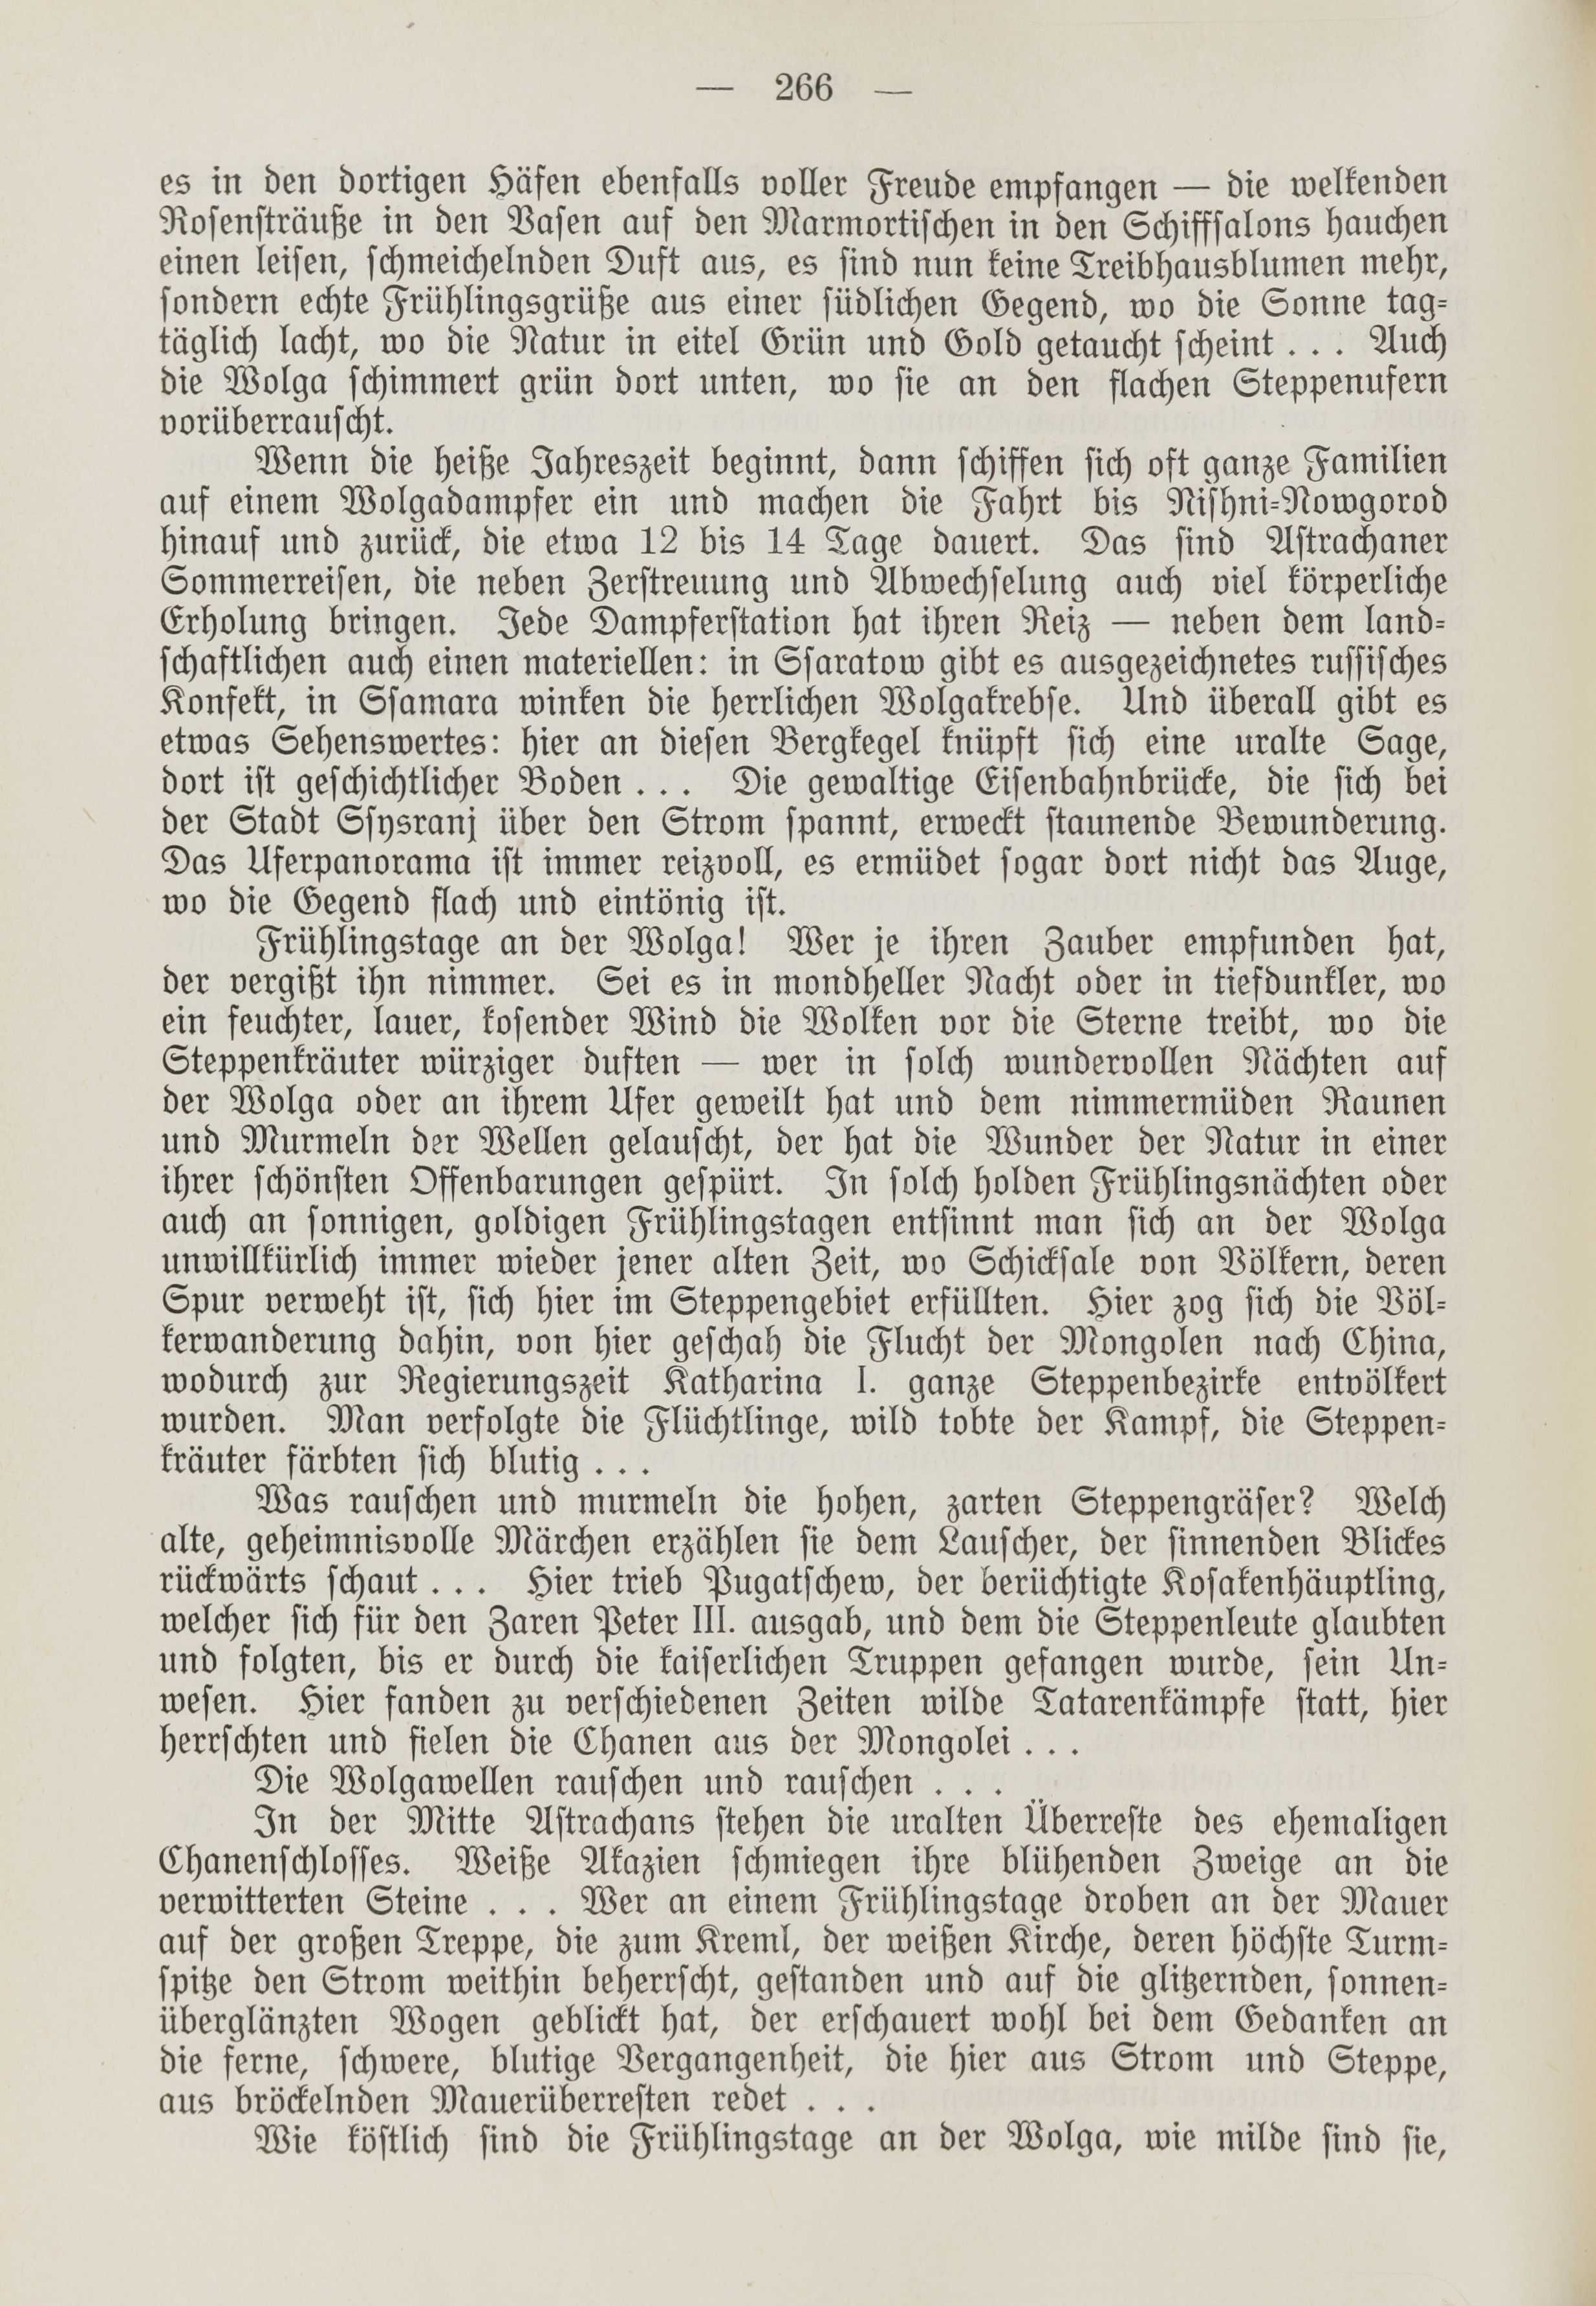 Frühlingstage an der Wolga (1912) | 4. (266) Main body of text